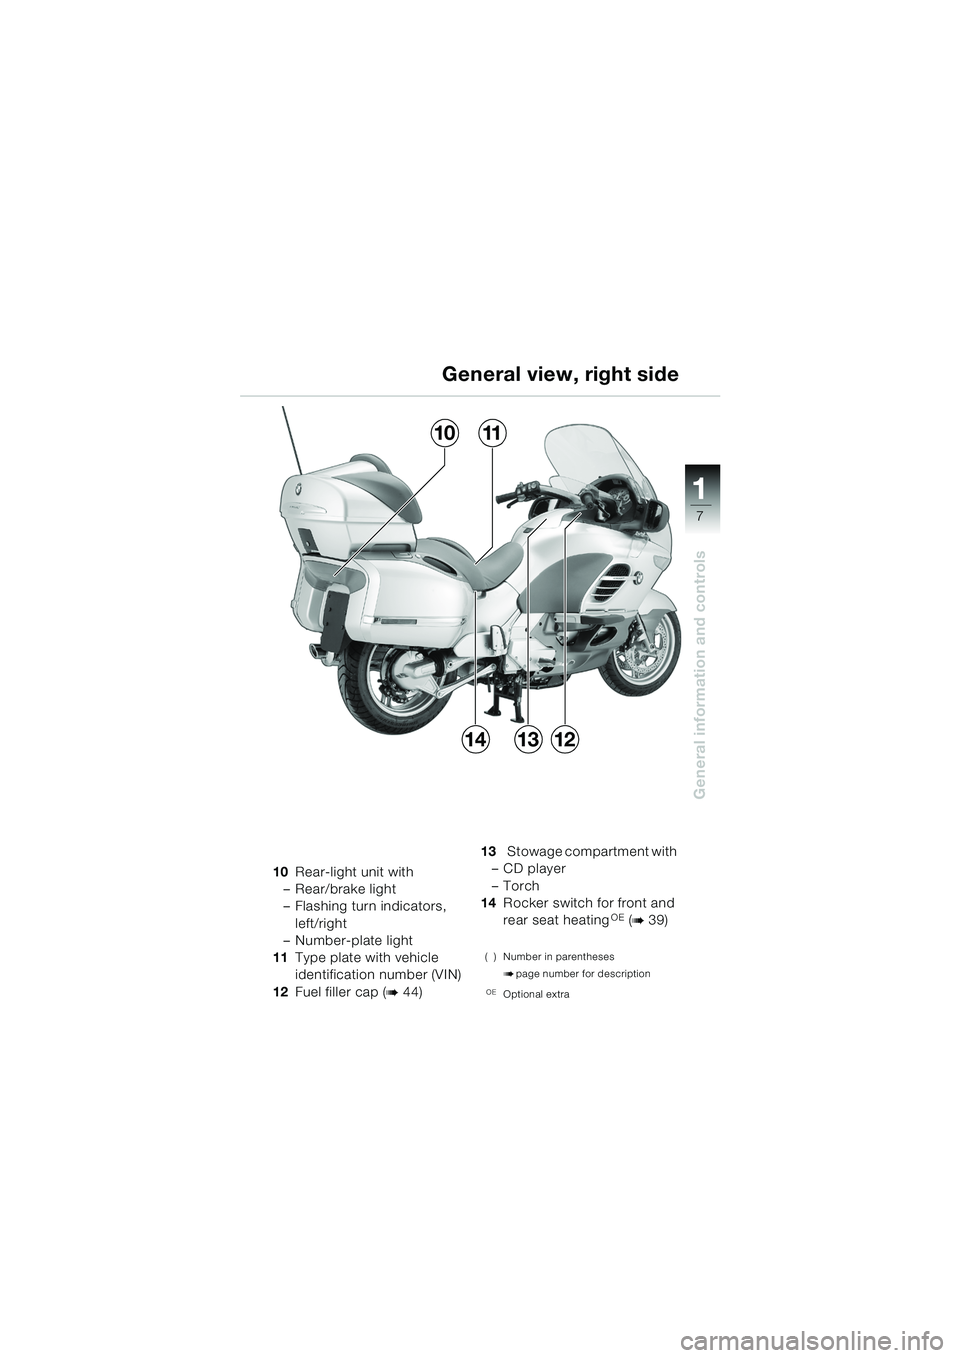 BMW MOTORRAD K 1200 LT 2005  Riders Manual (in English) 7
General information and controls
1
General view, right side
10Rear-light unit with
– Rear/brake light
– Flashing turn indicators,  left/right
– Number-plate light
11 Type plate with vehicle 
i